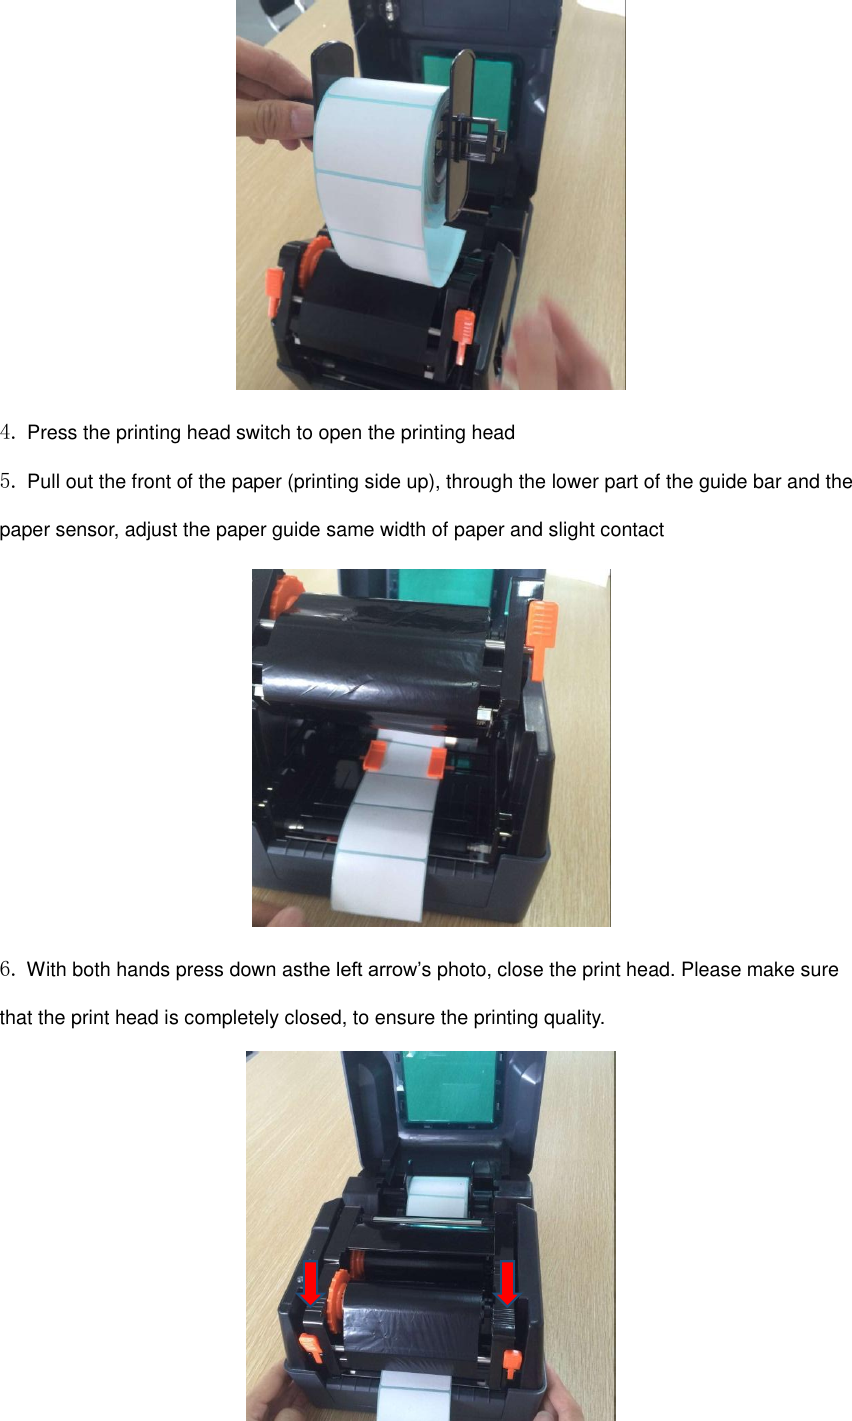  4. Press the printing head switch to open the printing head 5. Pull out the front of the paper (printing side up), through the lower part of the guide bar and the paper sensor, adjust the paper guide same width of paper and slight contact  6. With both hands press down asthe left arrow’s photo, close the print head. Please make sure that the print head is completely closed, to ensure the printing quality.  